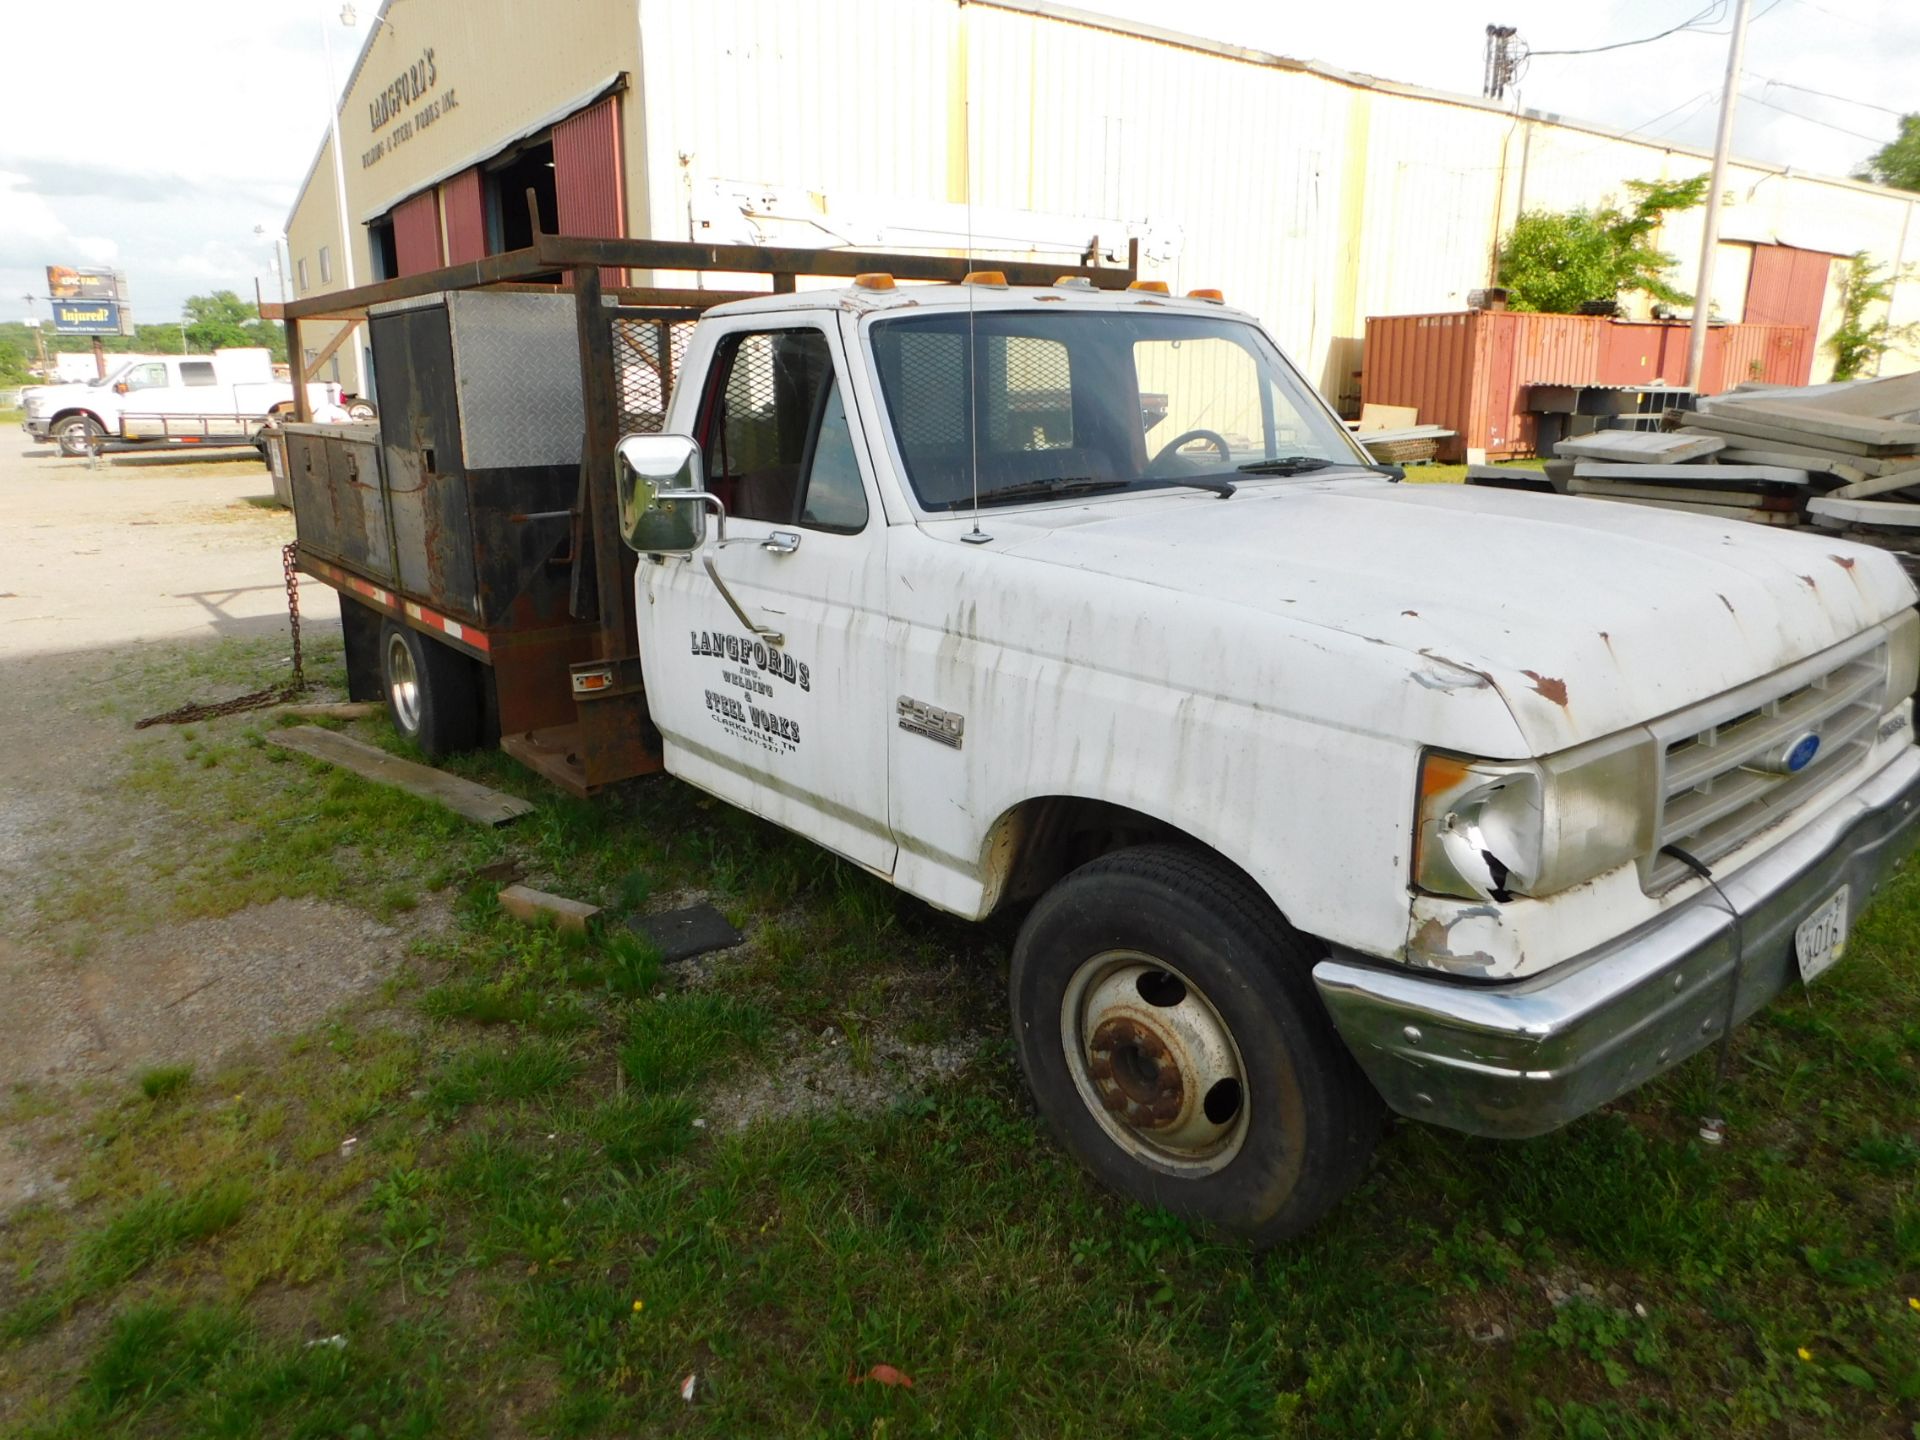 1984 Ford F350 Dually Service Truck, Vin 1FDJF37M6KNB68868, Diesel, Manual Transmission, Not In - Image 4 of 6